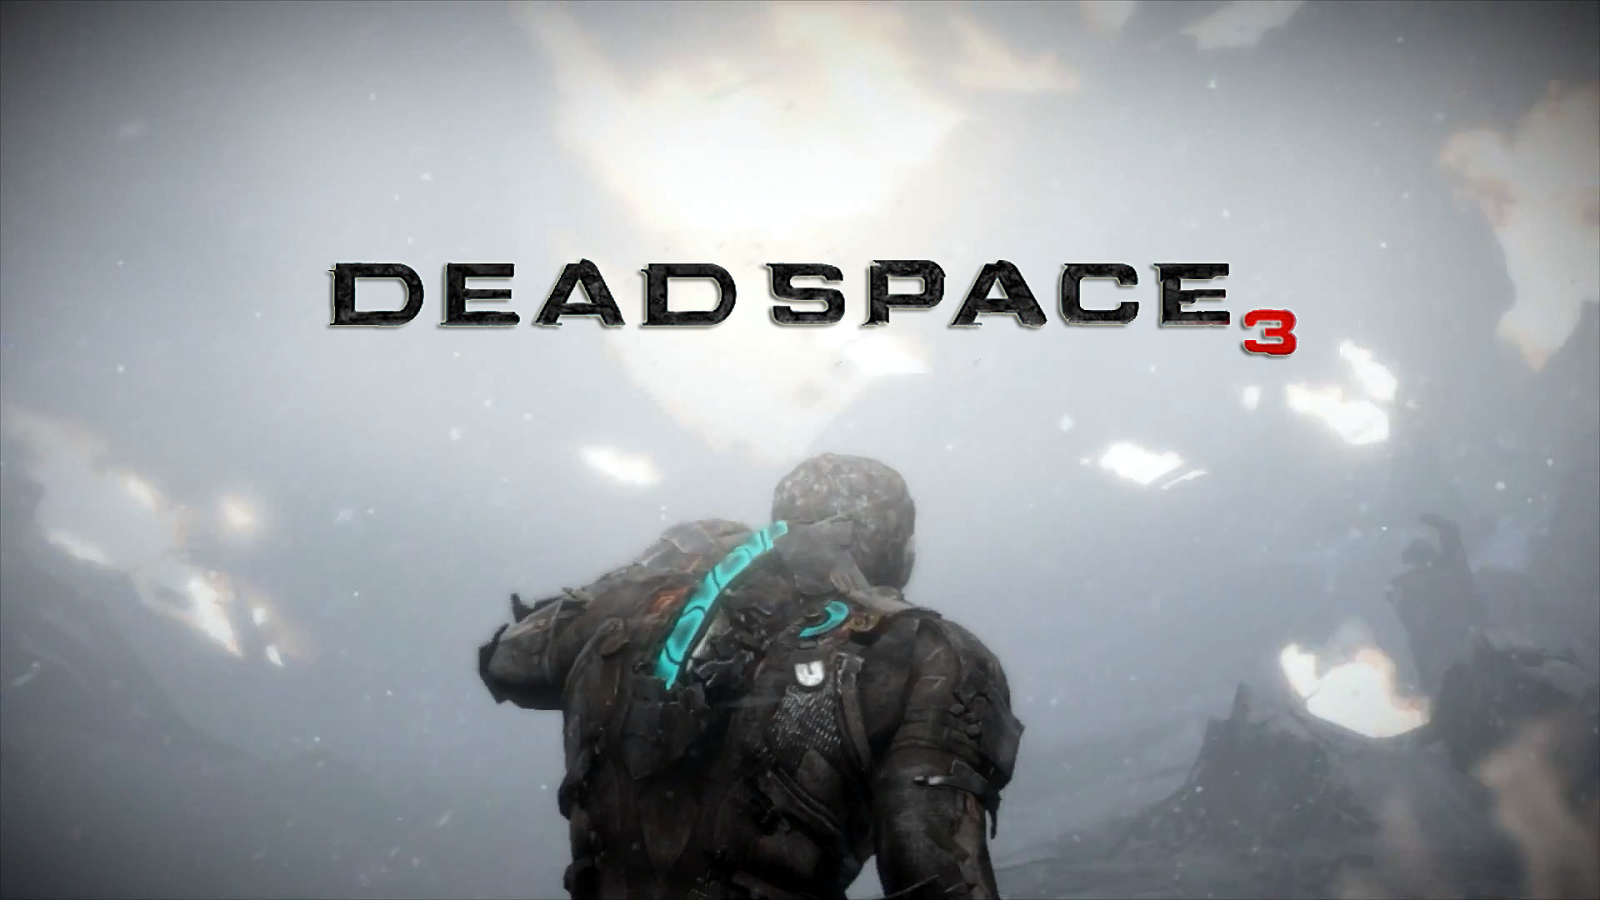 dead space 3 hd wallpapers check out the cool latest dead space 3